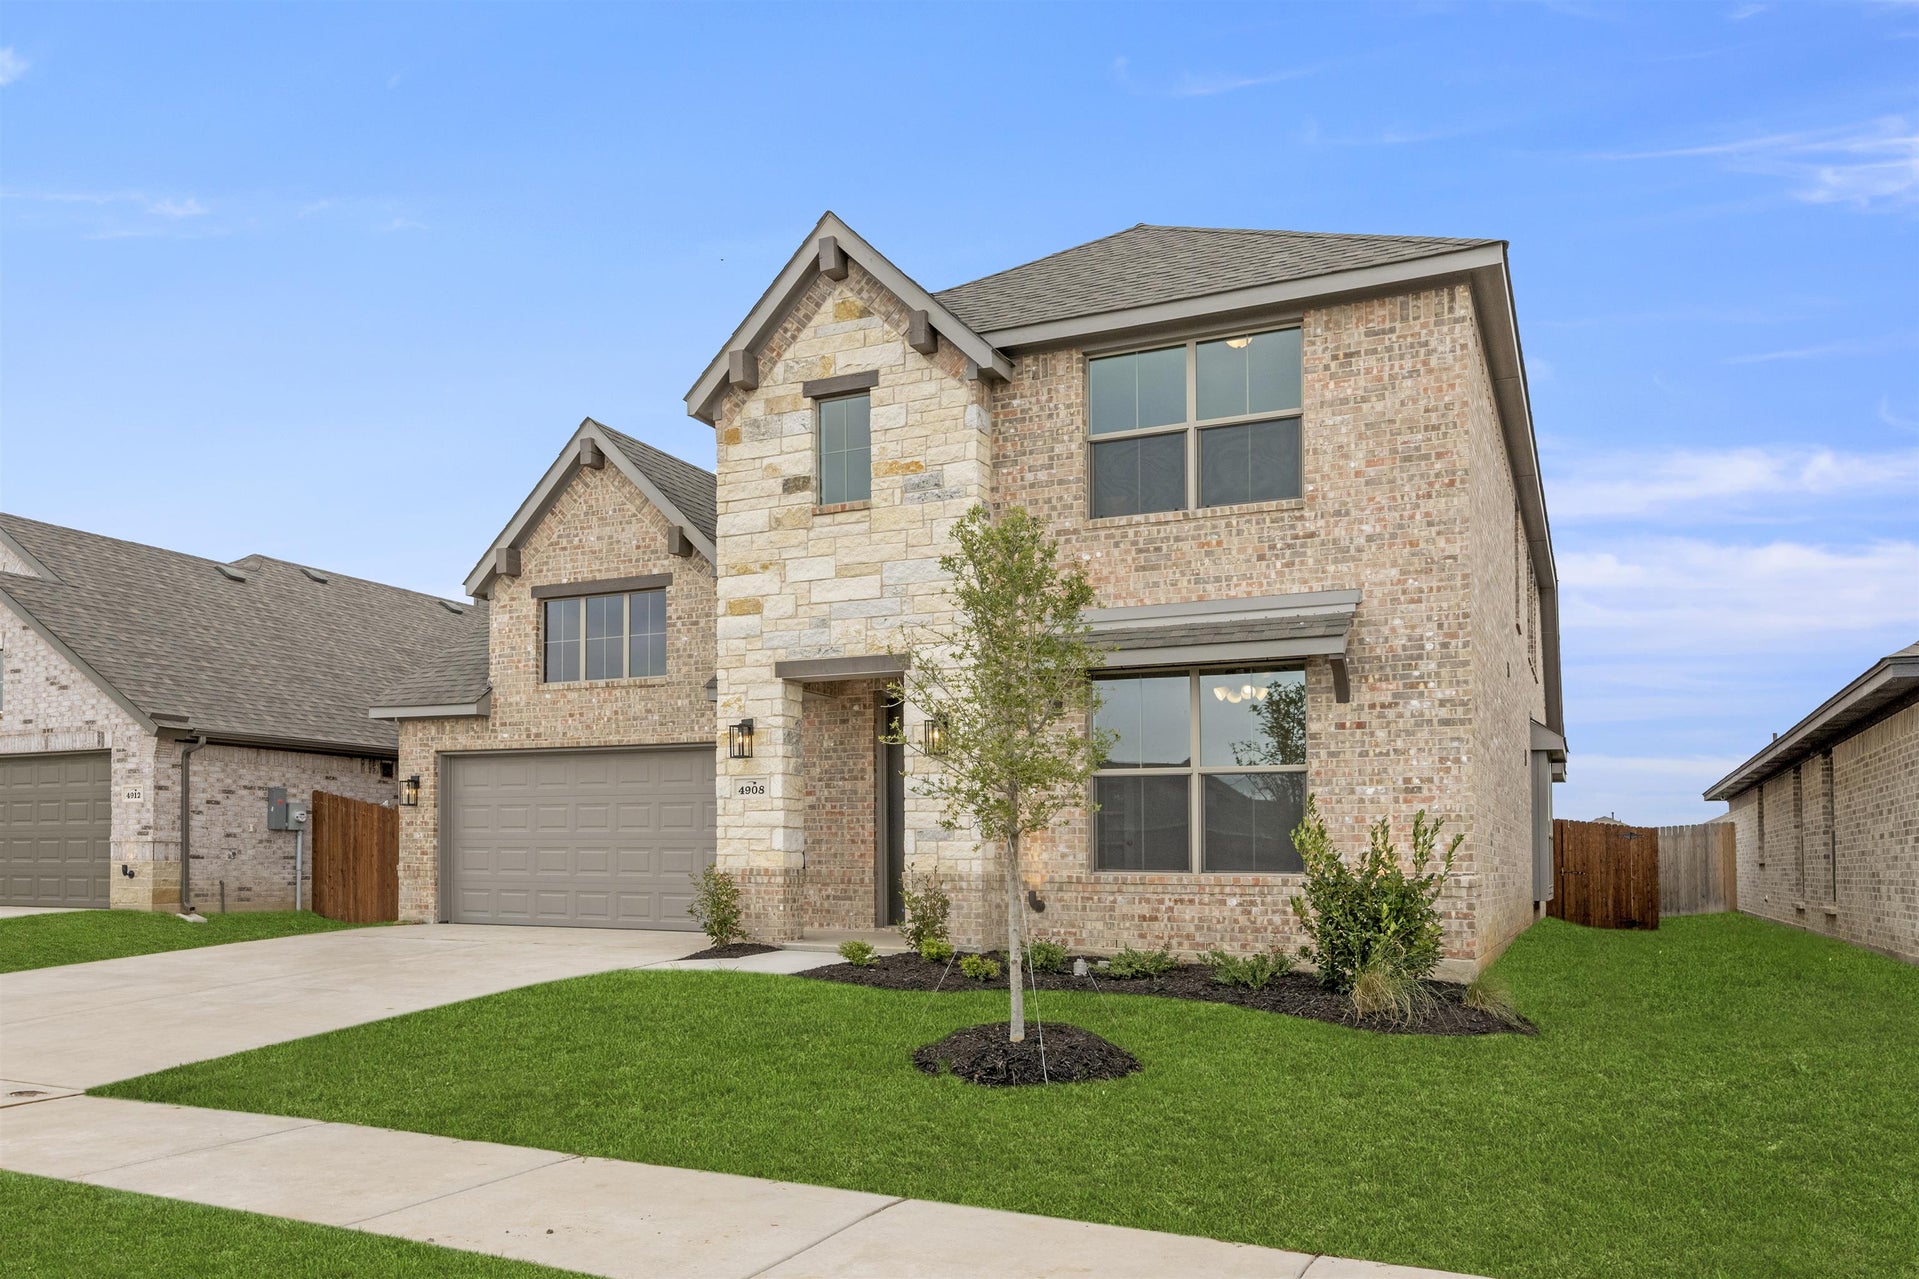 4br New Home in Fort Worth, TX